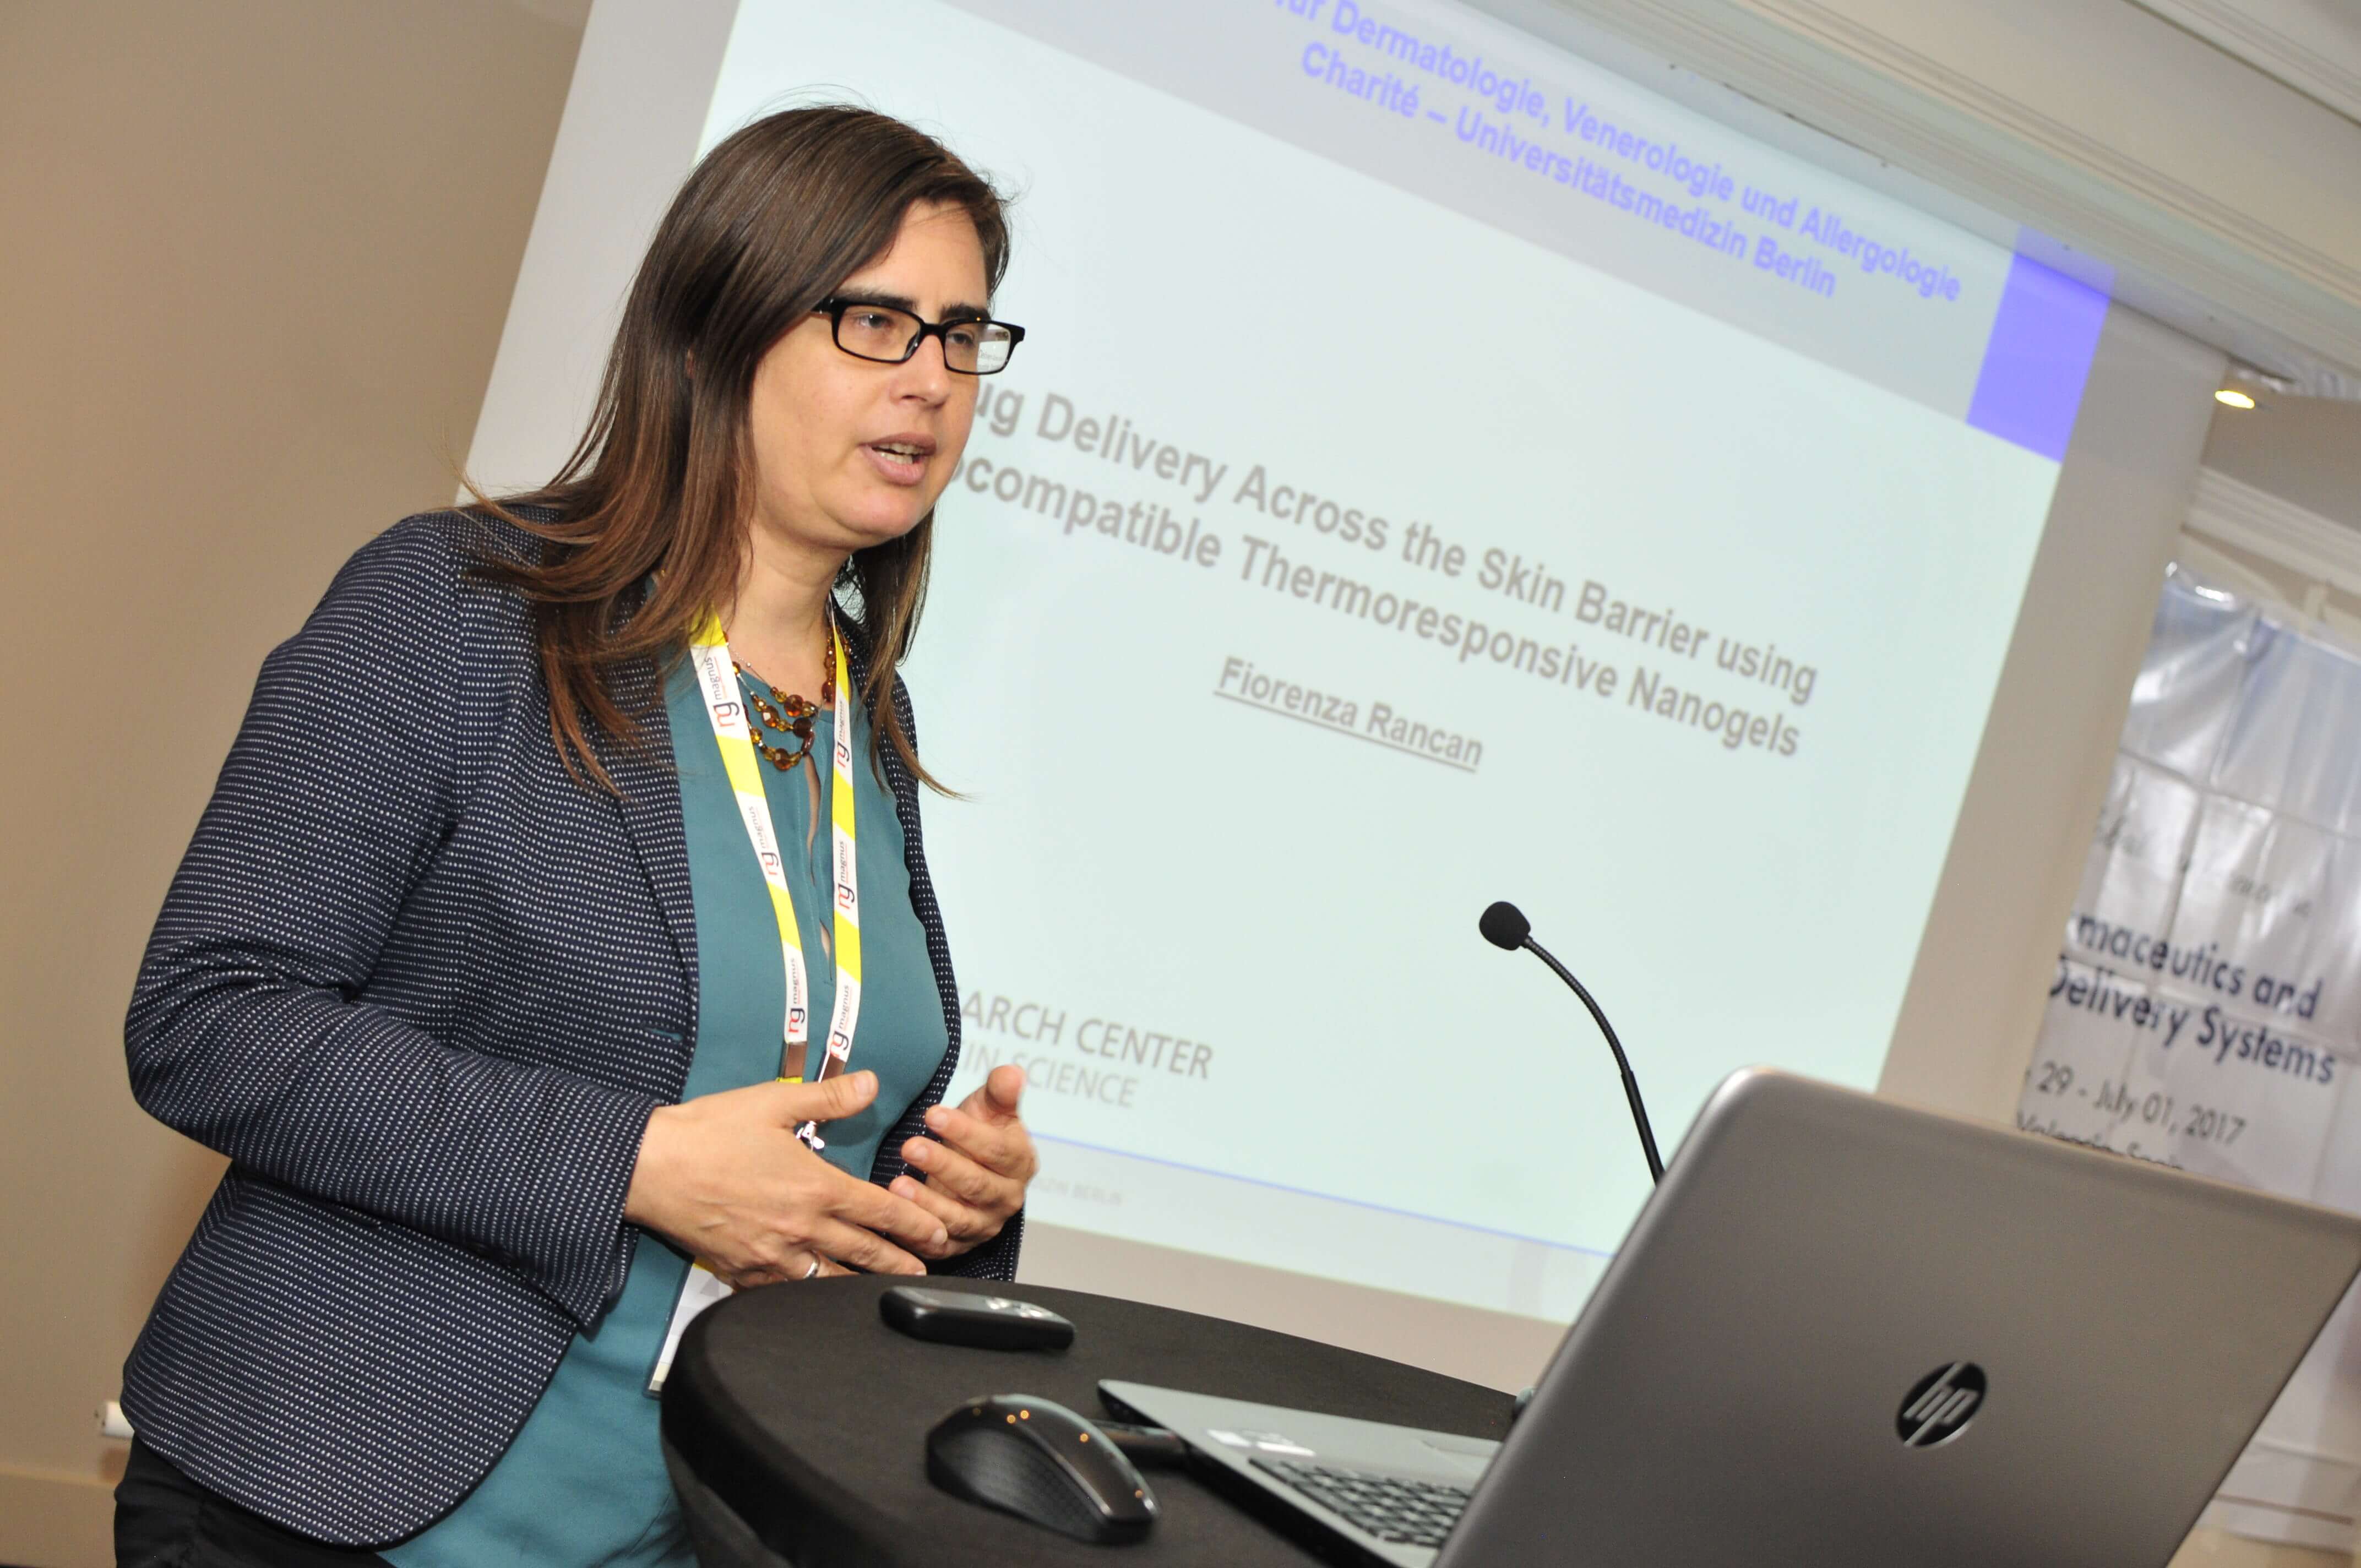 Speaker for Biotechnology conferences 2020-Fiorenza Rancan Charite